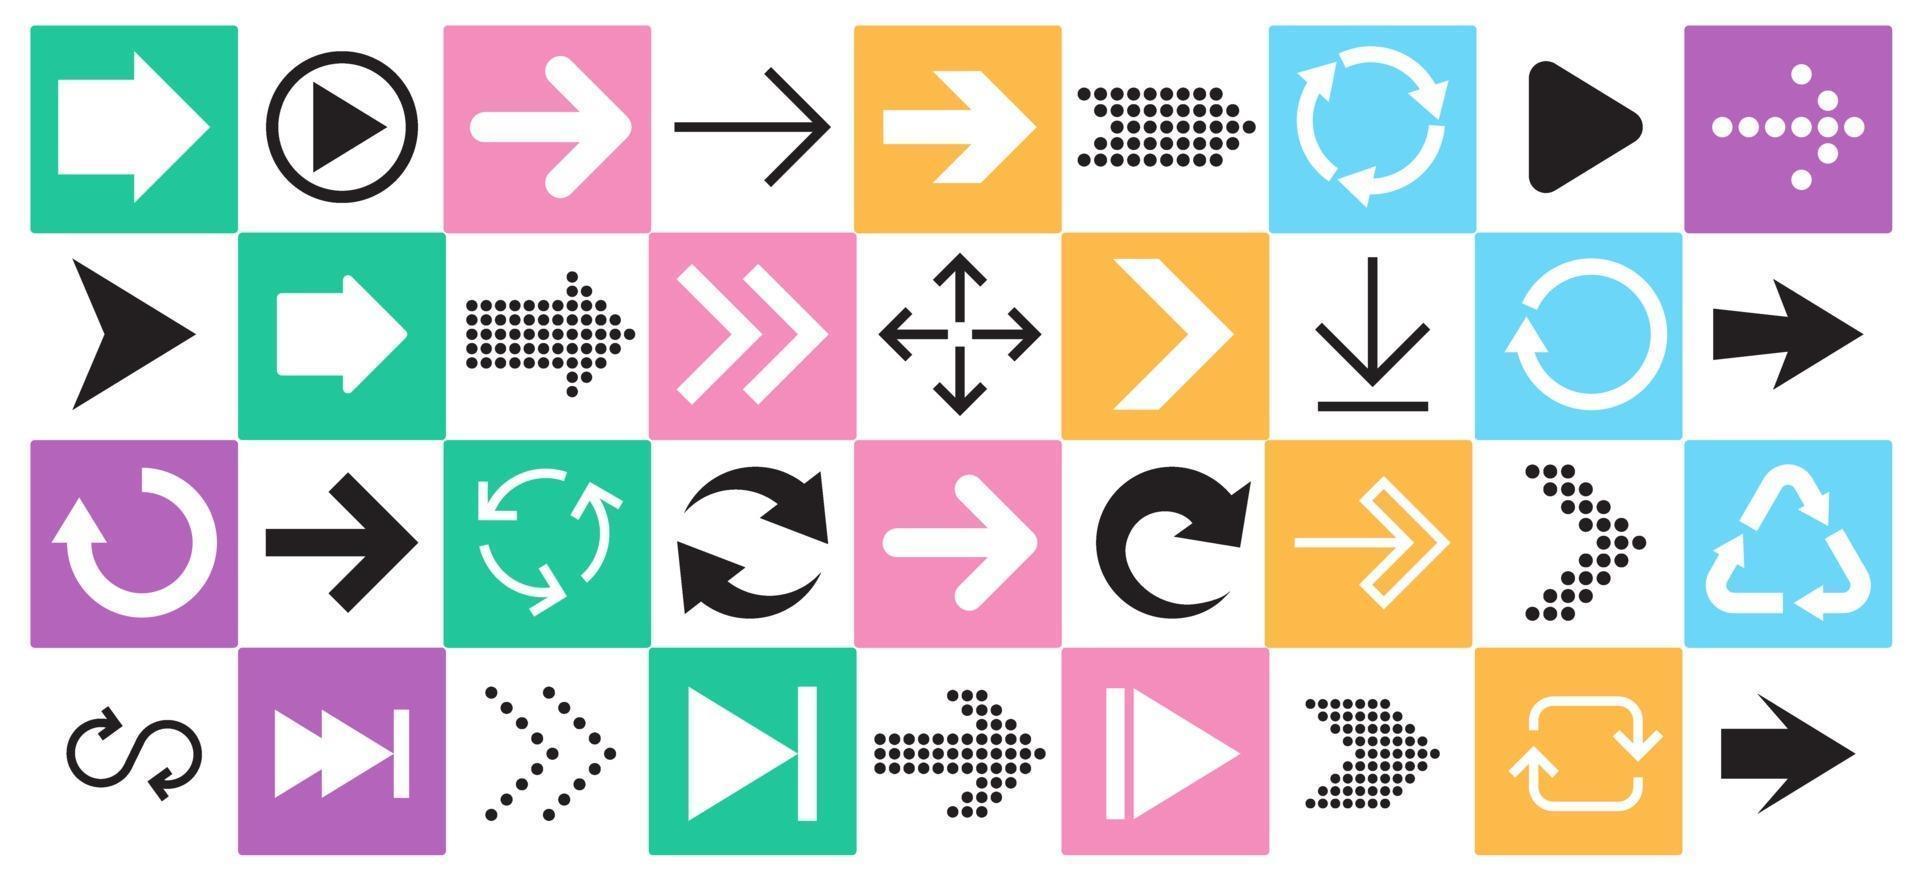 Arrow sign icon set. Collection of arrows for web design, mobile apps, interface. vector